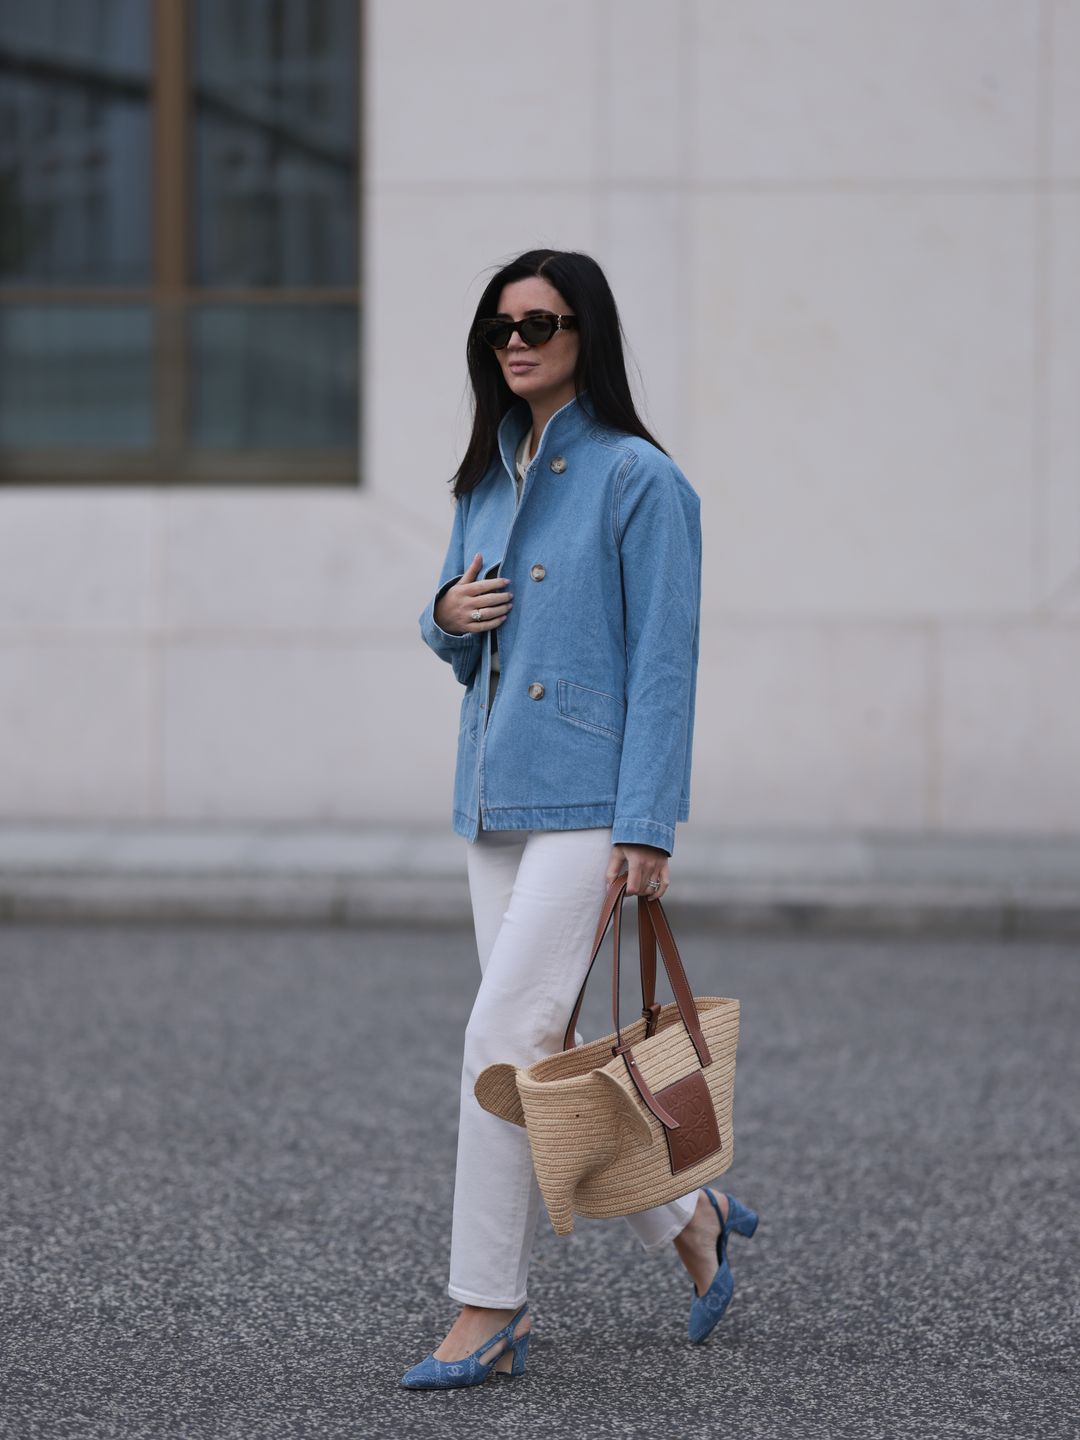 Fashion week guest wearing white jeans with a denim jacket 